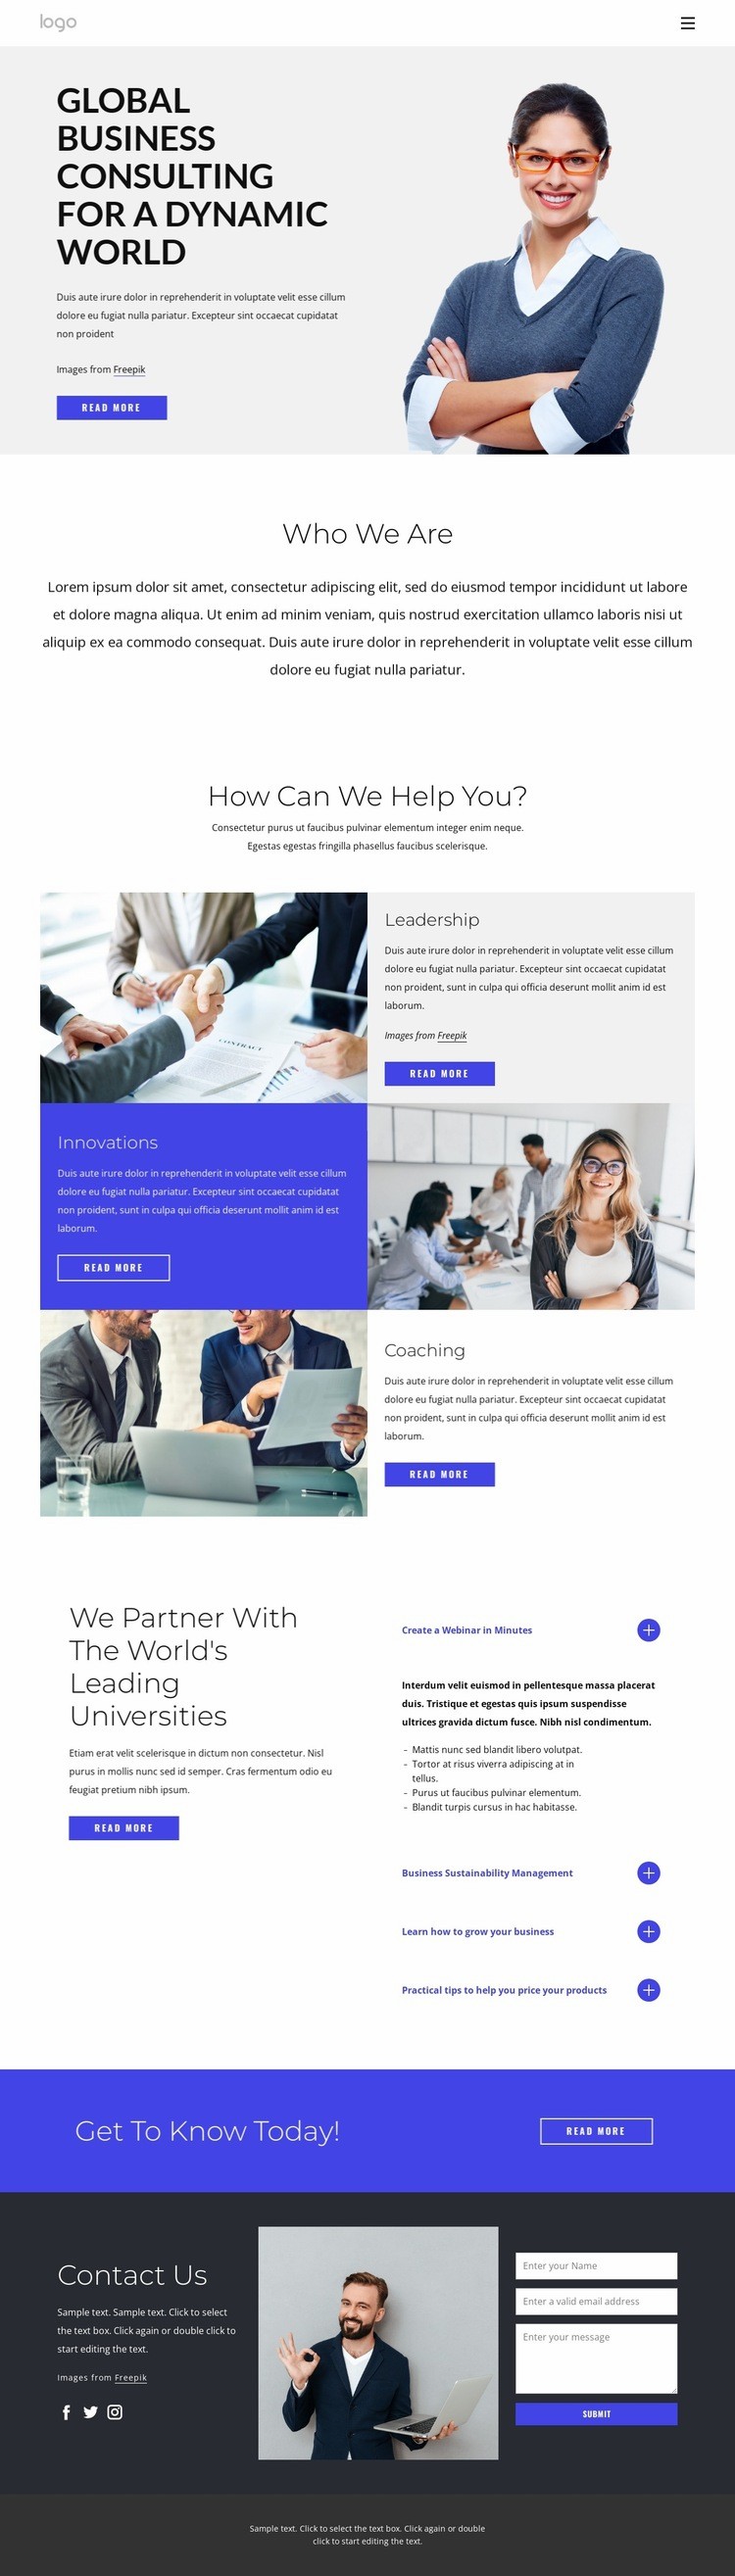 Global business consulting Web Page Design